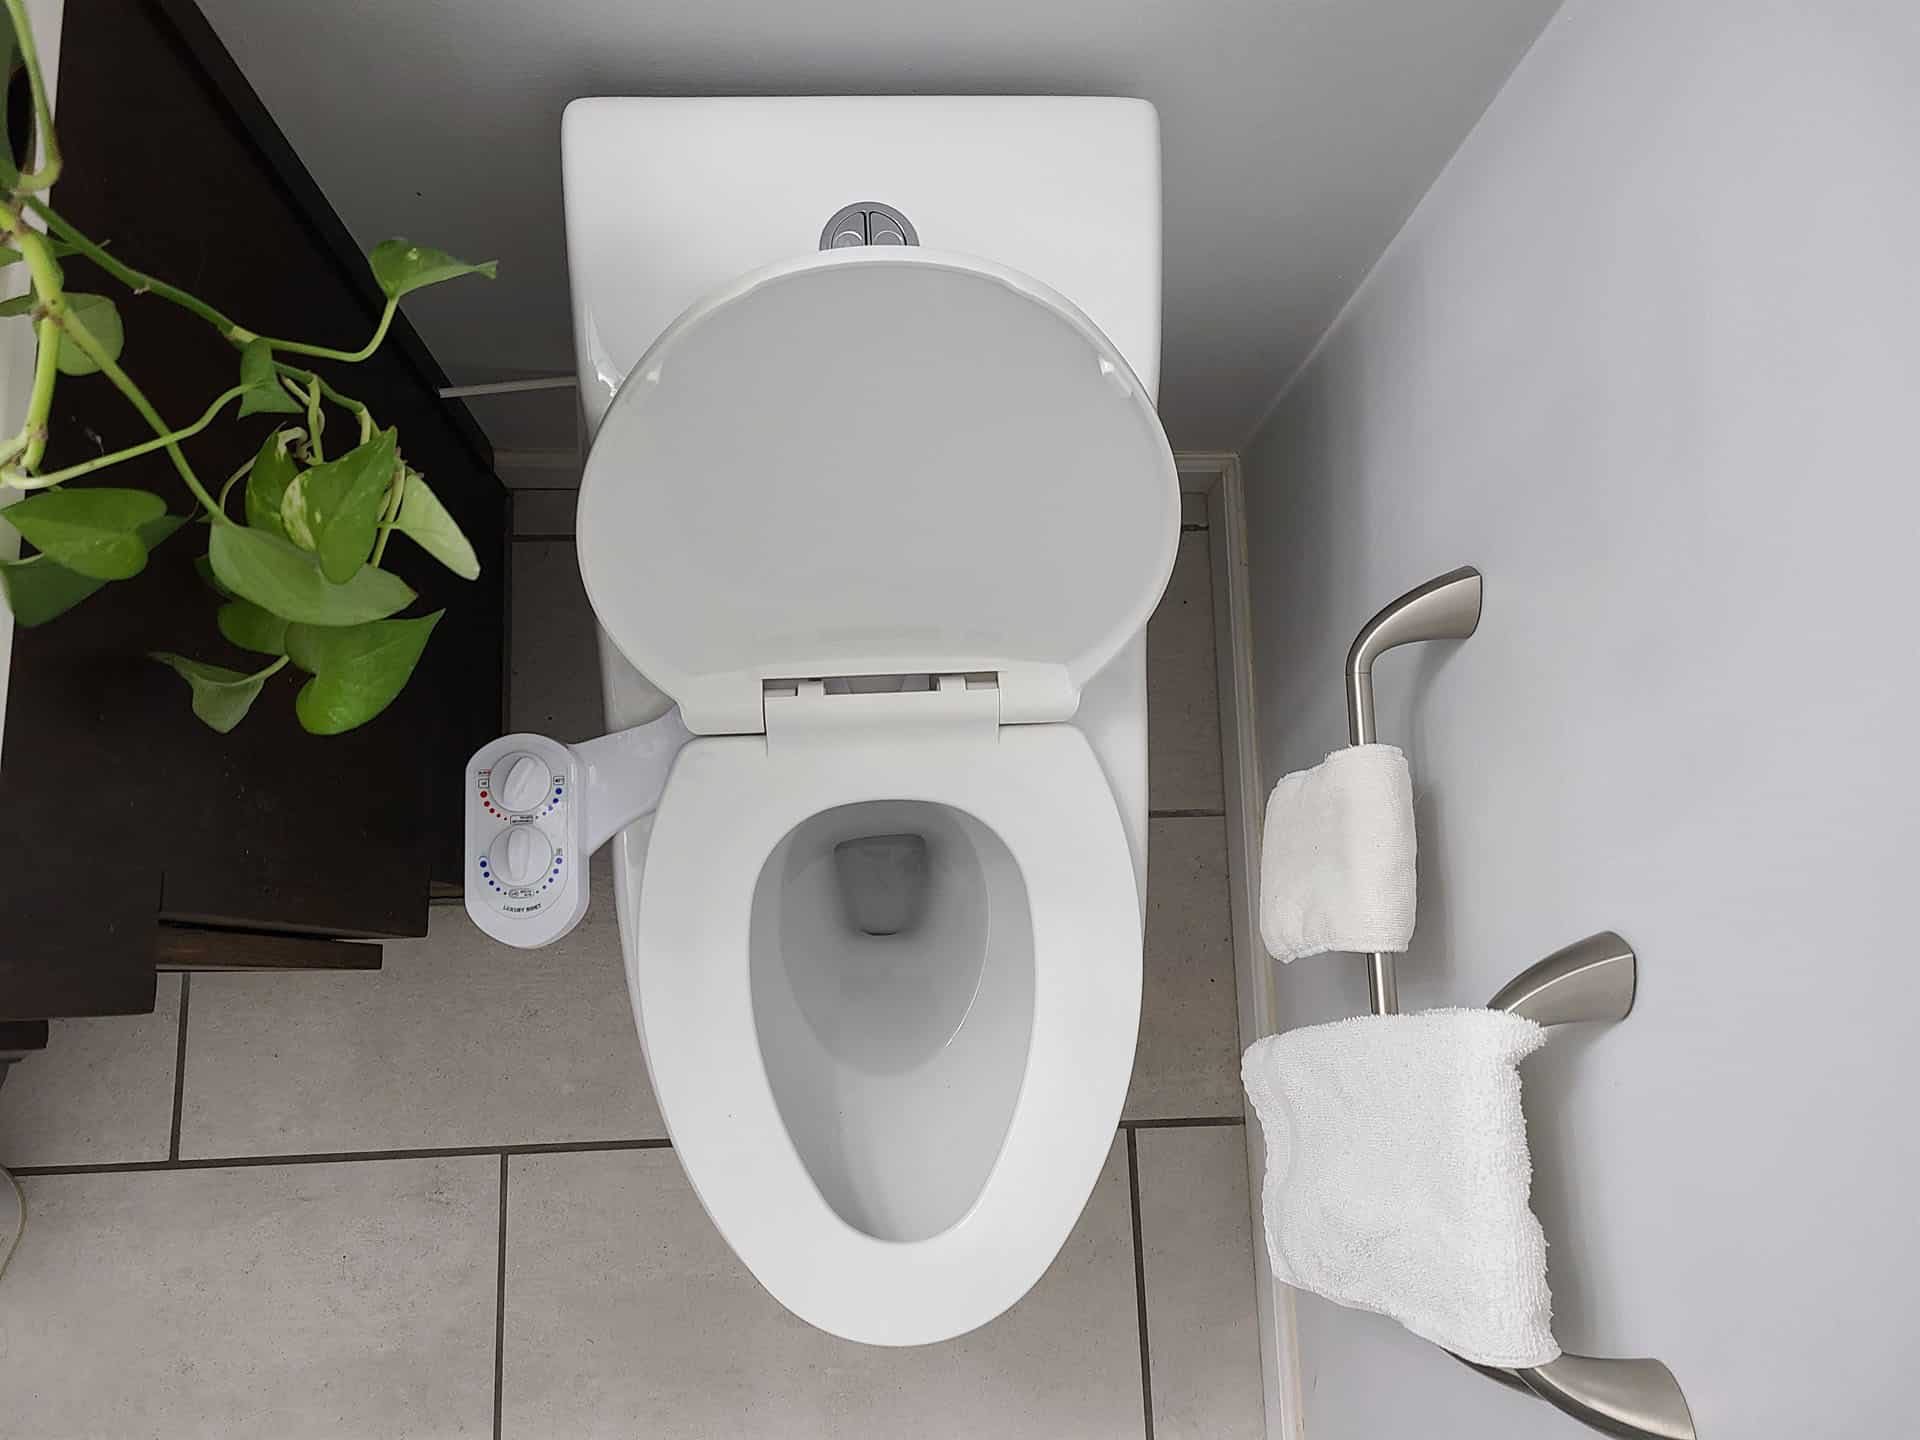 Improving our green living lifestyle by having a bidet